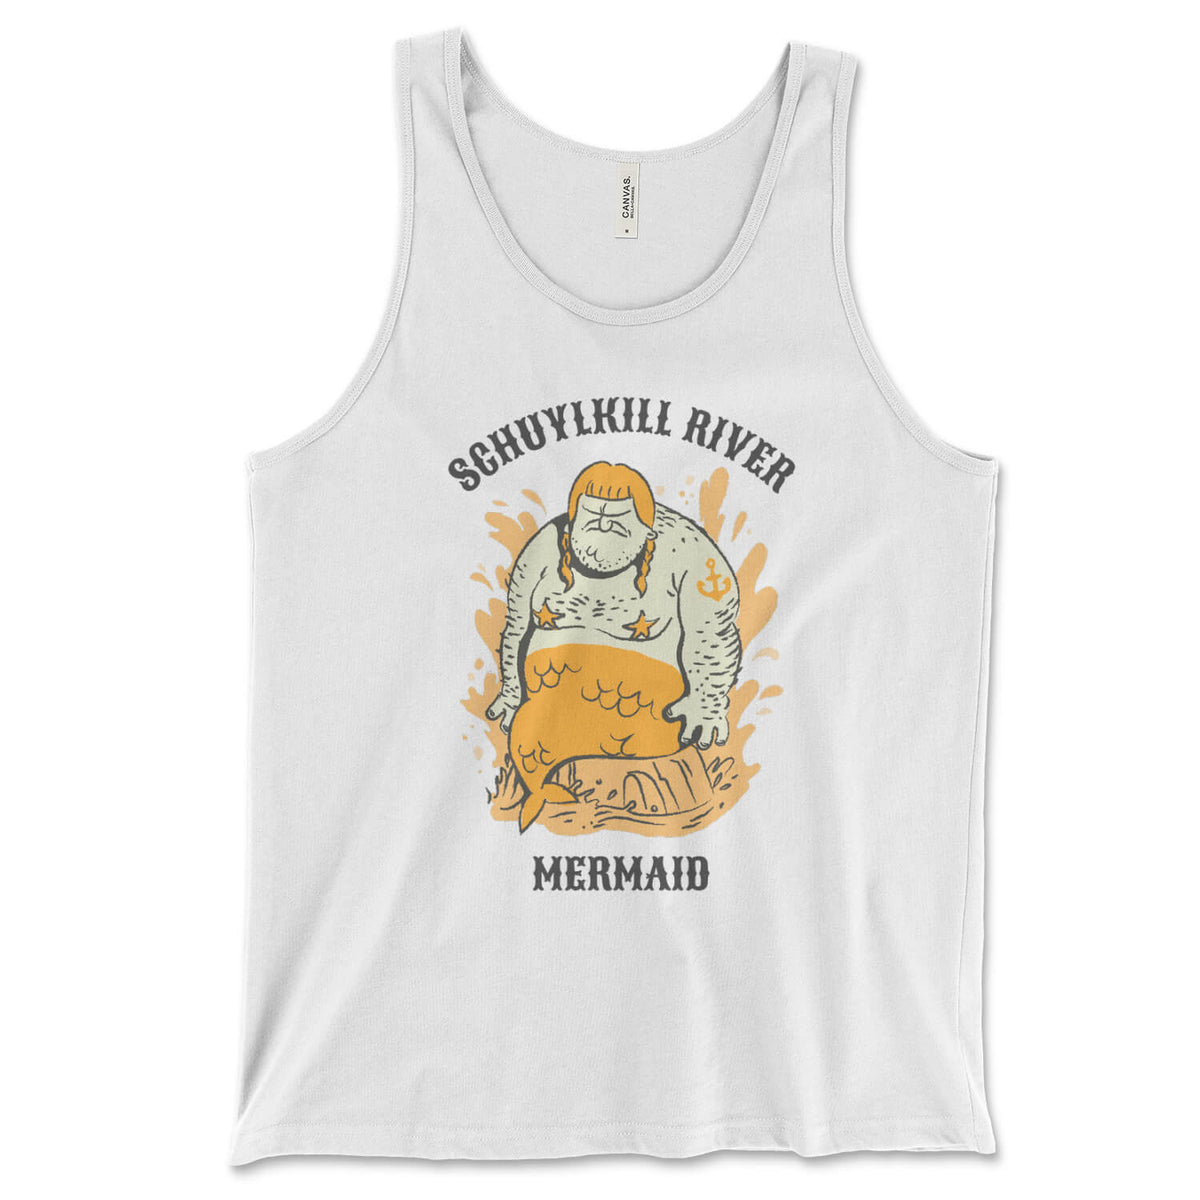 Schuylkill River Mermaid funny Philadelphia white tank top from Phillygoat